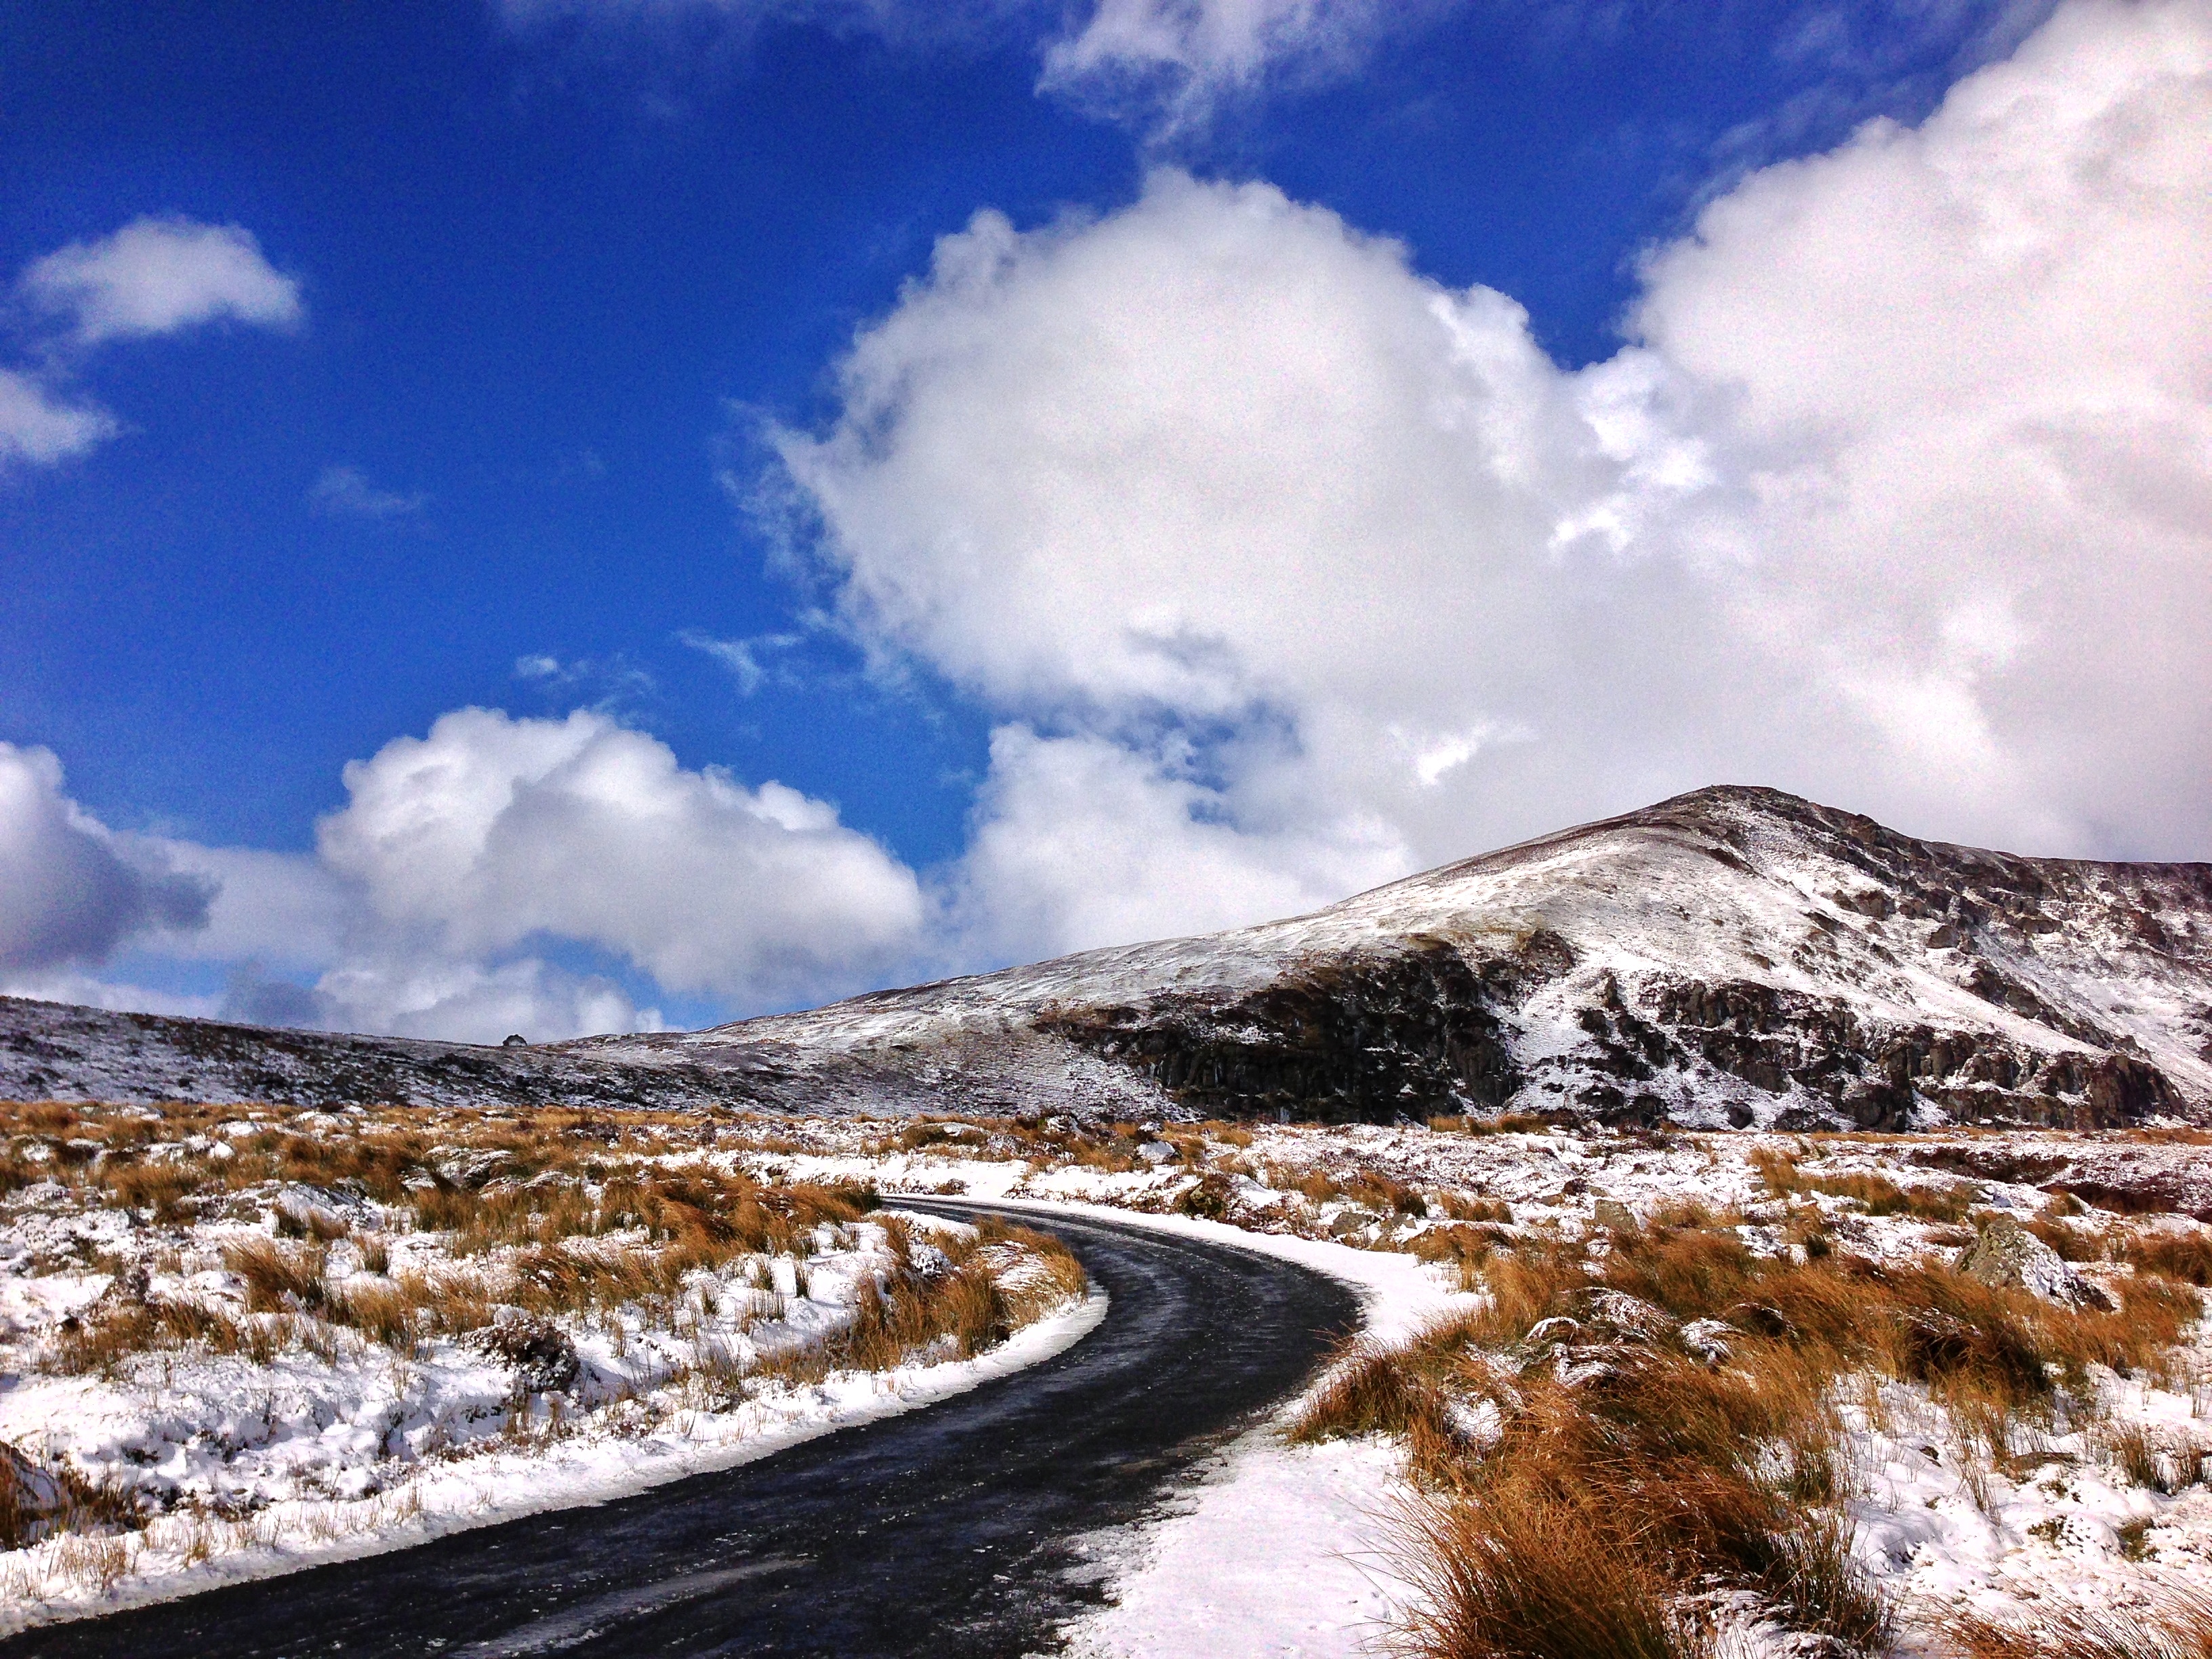 The Road to Mahon Falls, Coumfea West (Comeragh Mts)